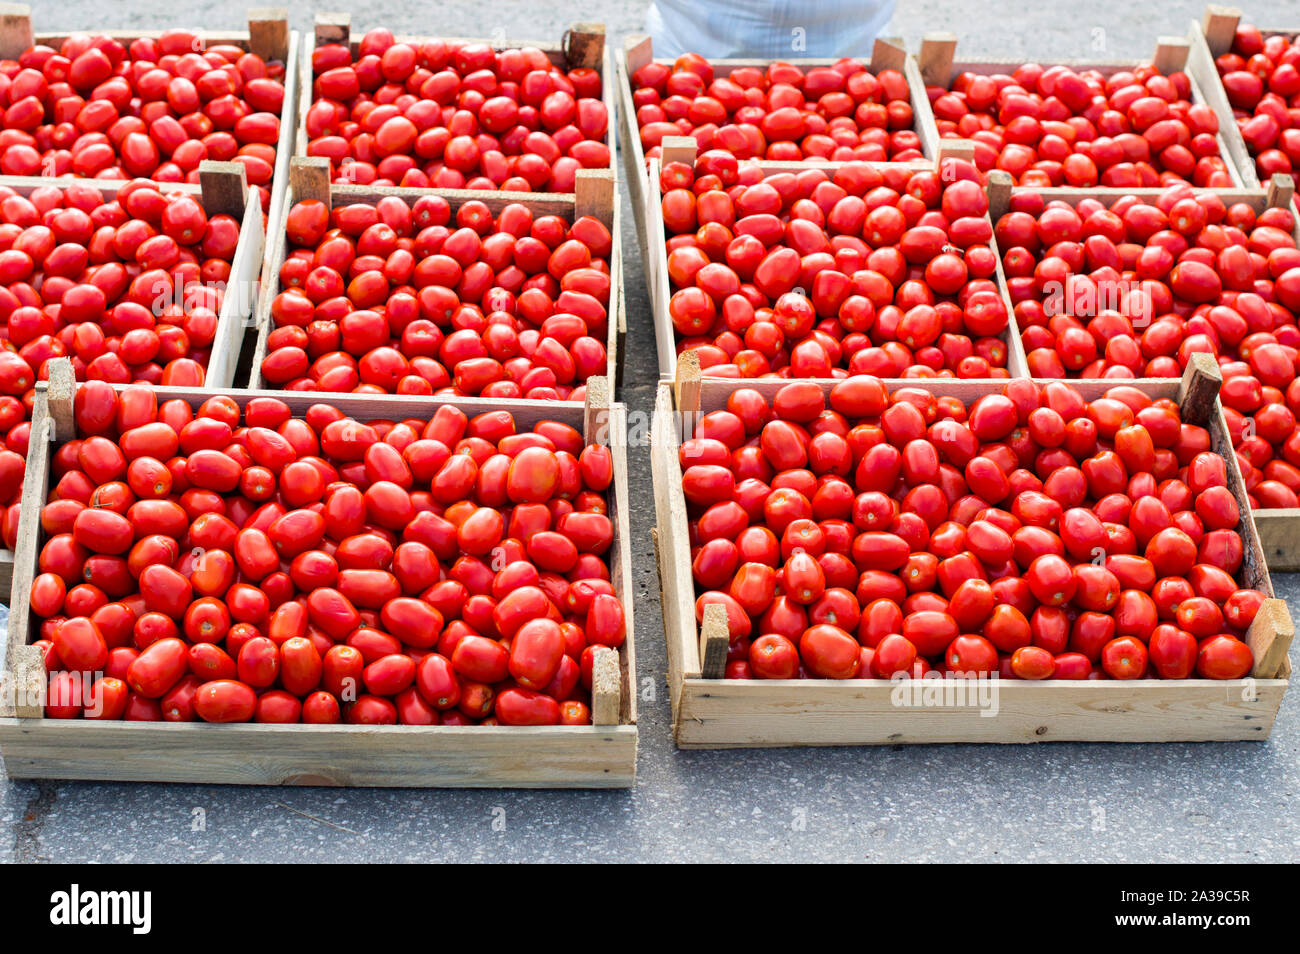 Red ripe tomatoes lie for sale in wooden boxes in the open air market. Stock Photo